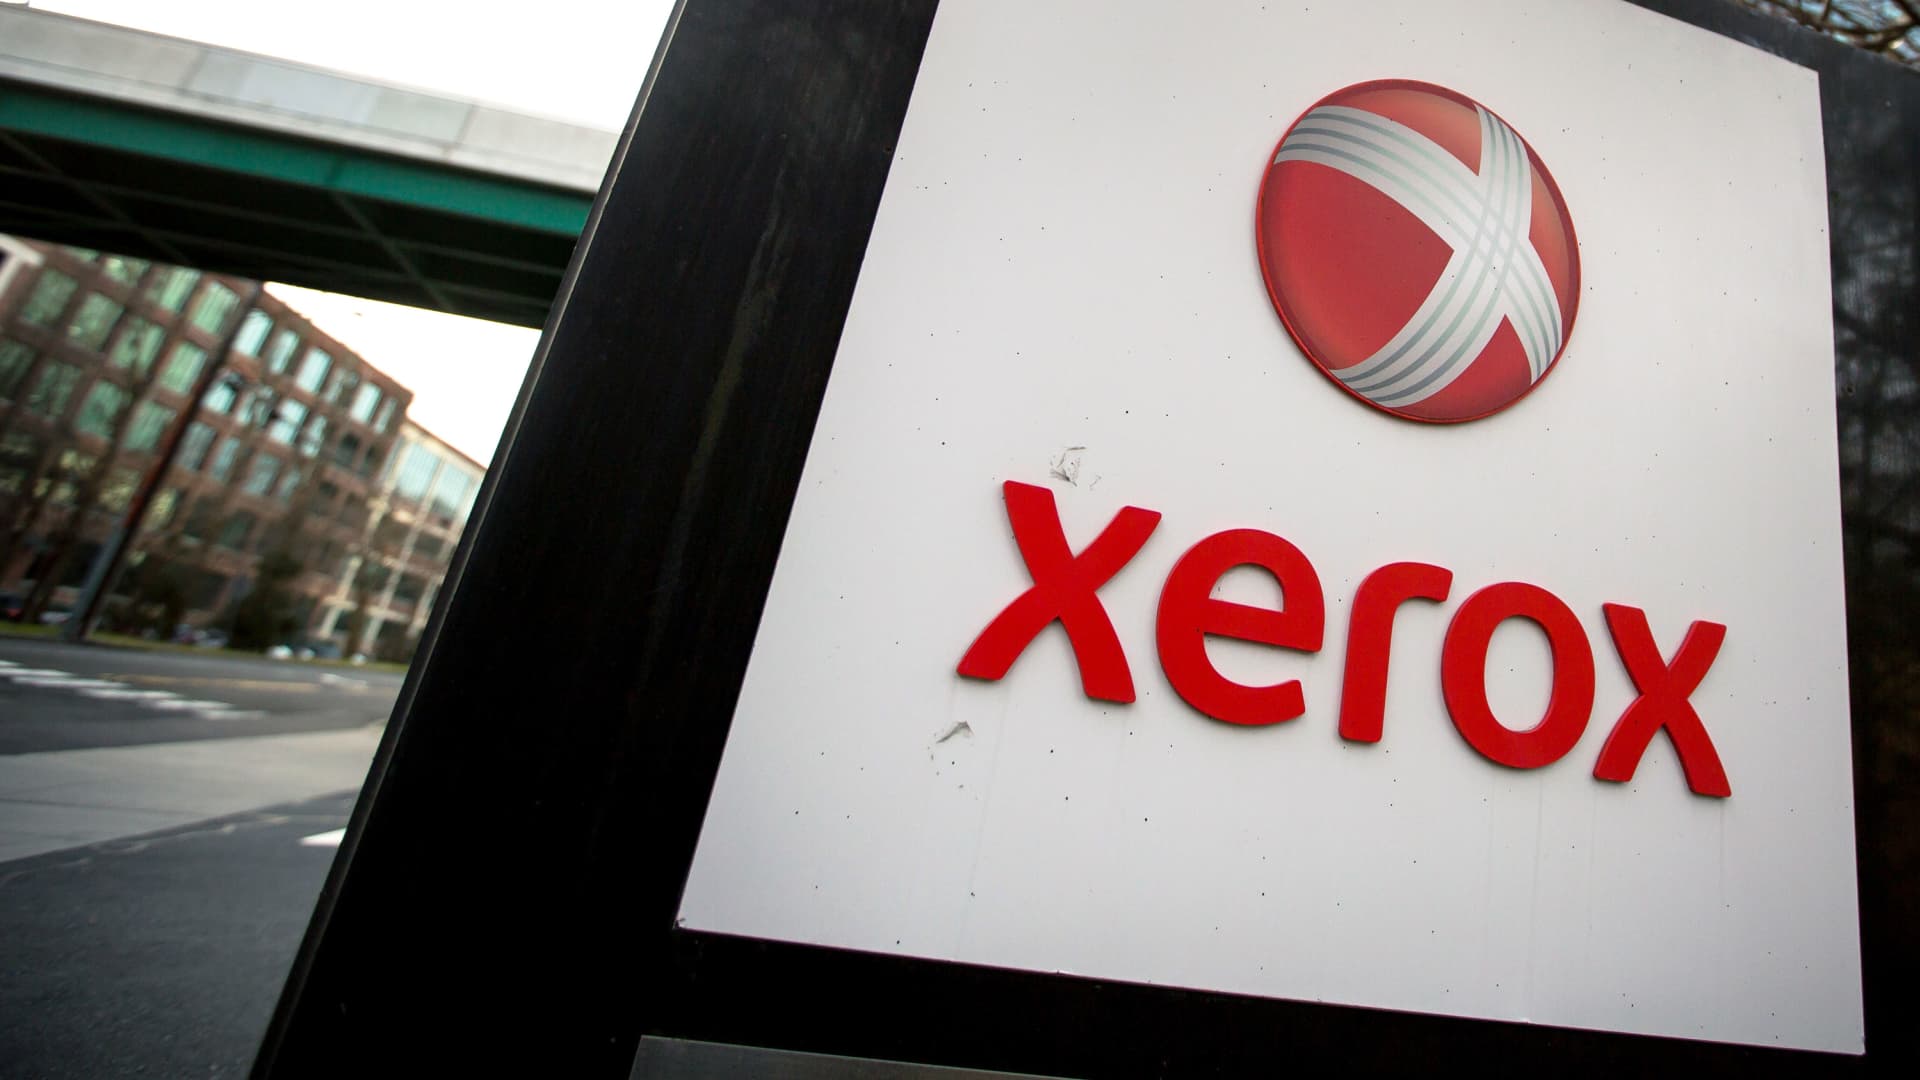 Xerox to cut 15% of its workforce